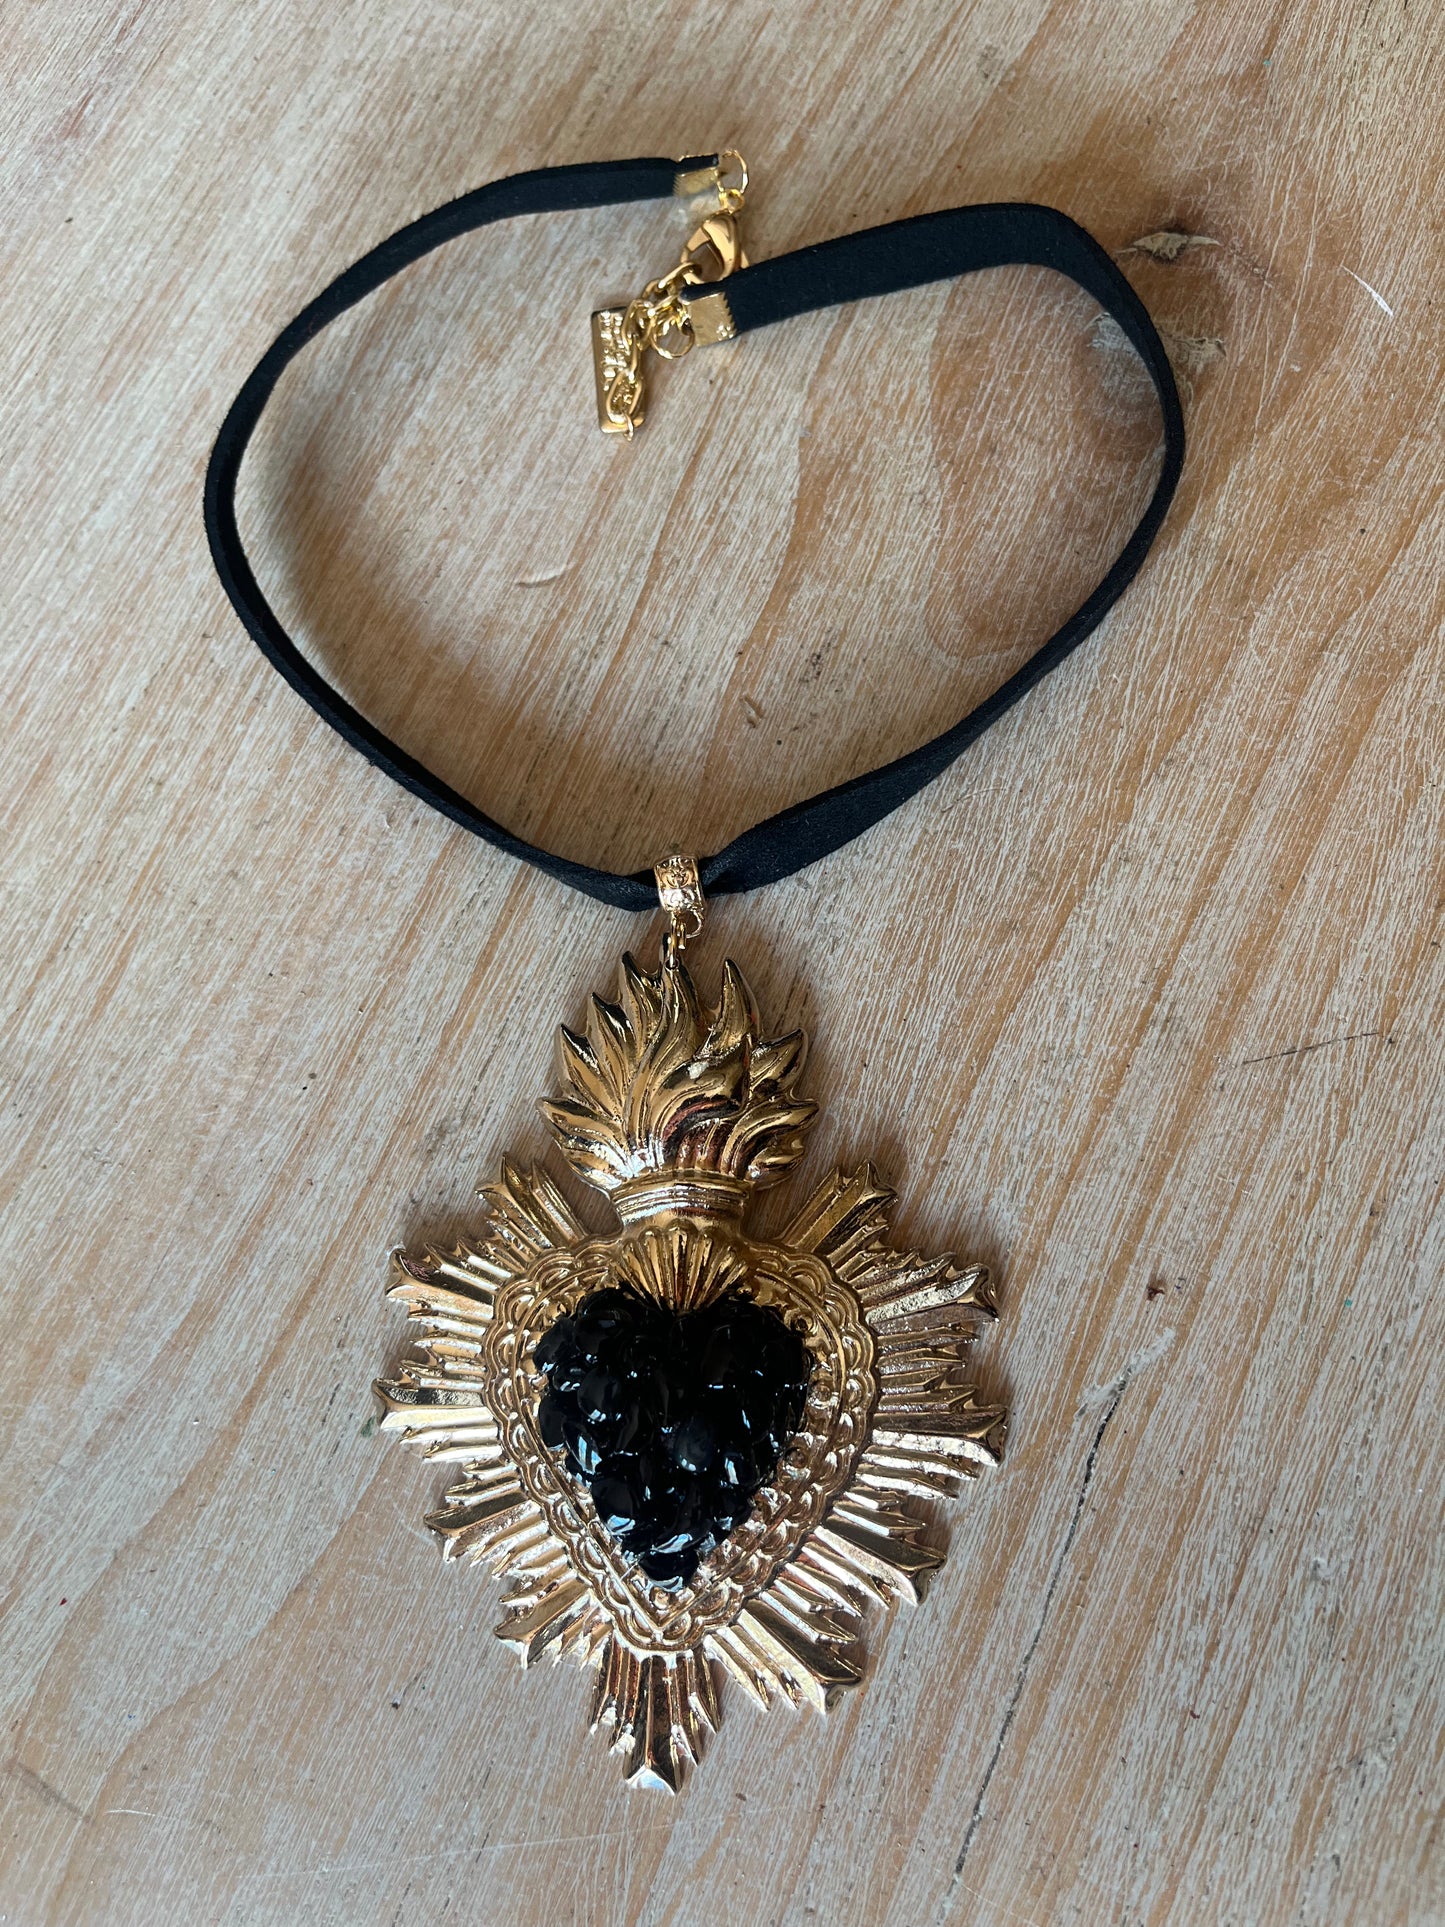 Pre-Order March Obsidian Sacred Heart Choker Necklace